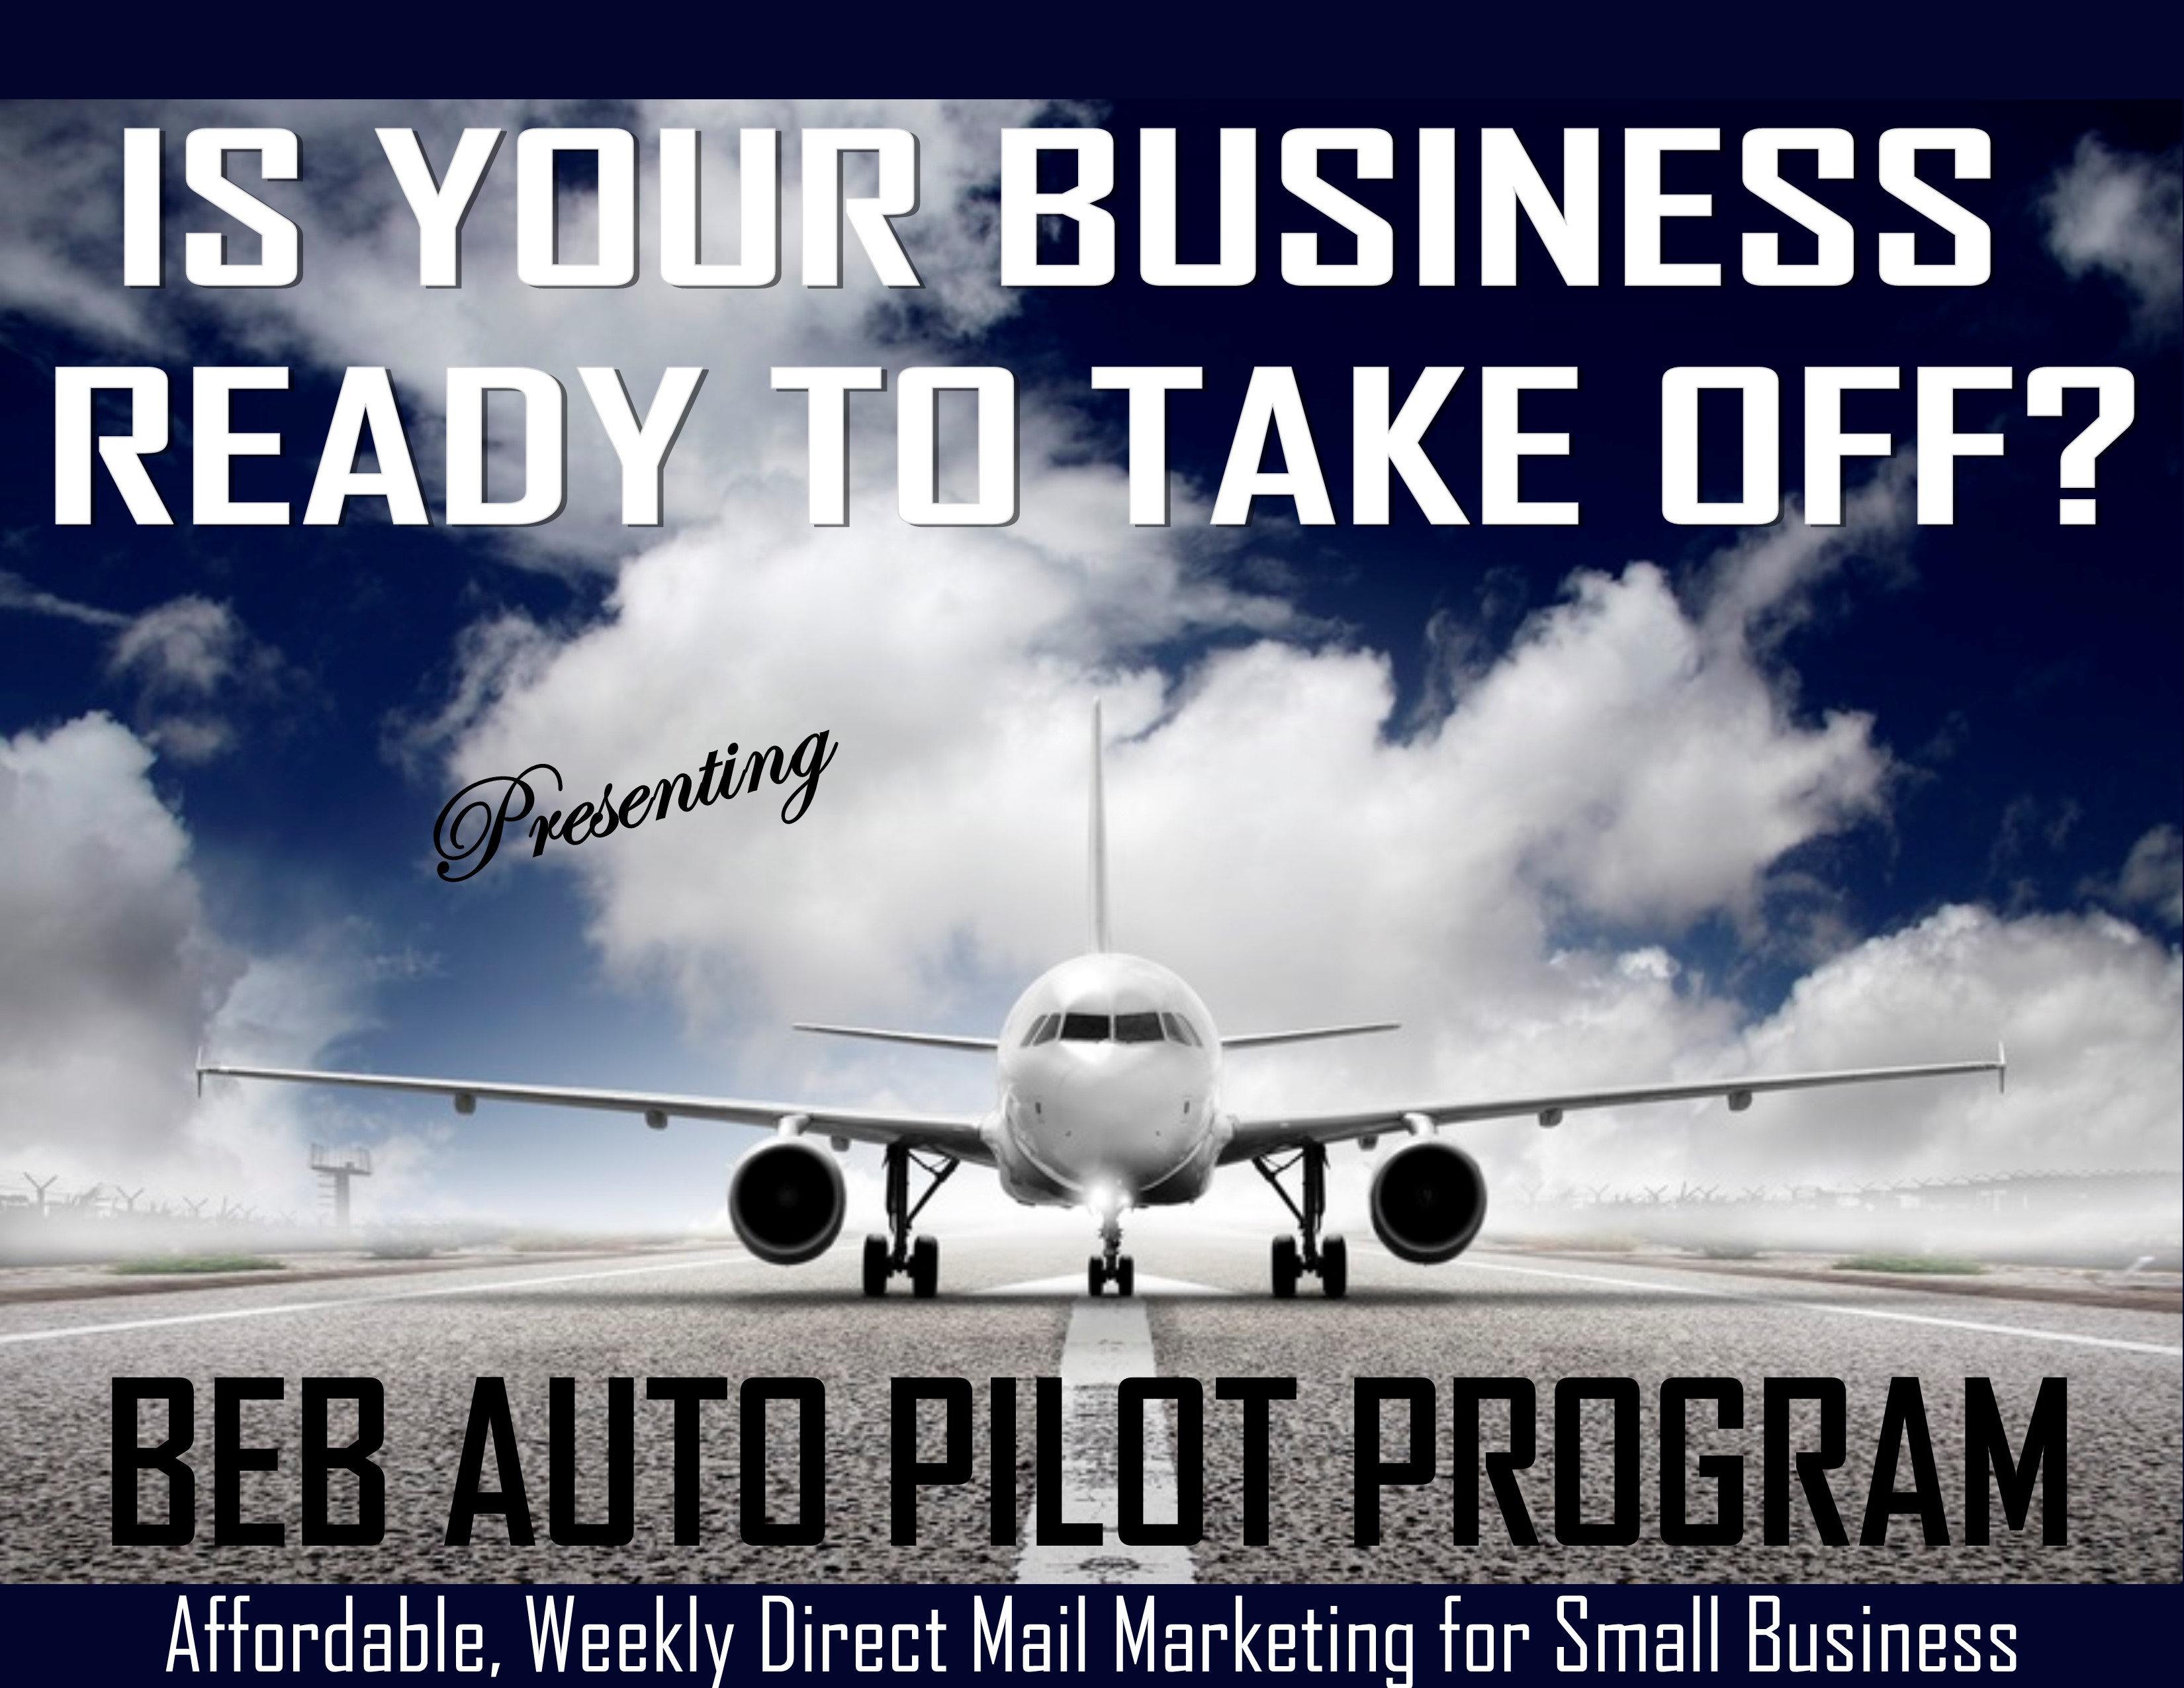 AUTO PILOT IS YOUR BUSINESS READY TO TAKE OFF